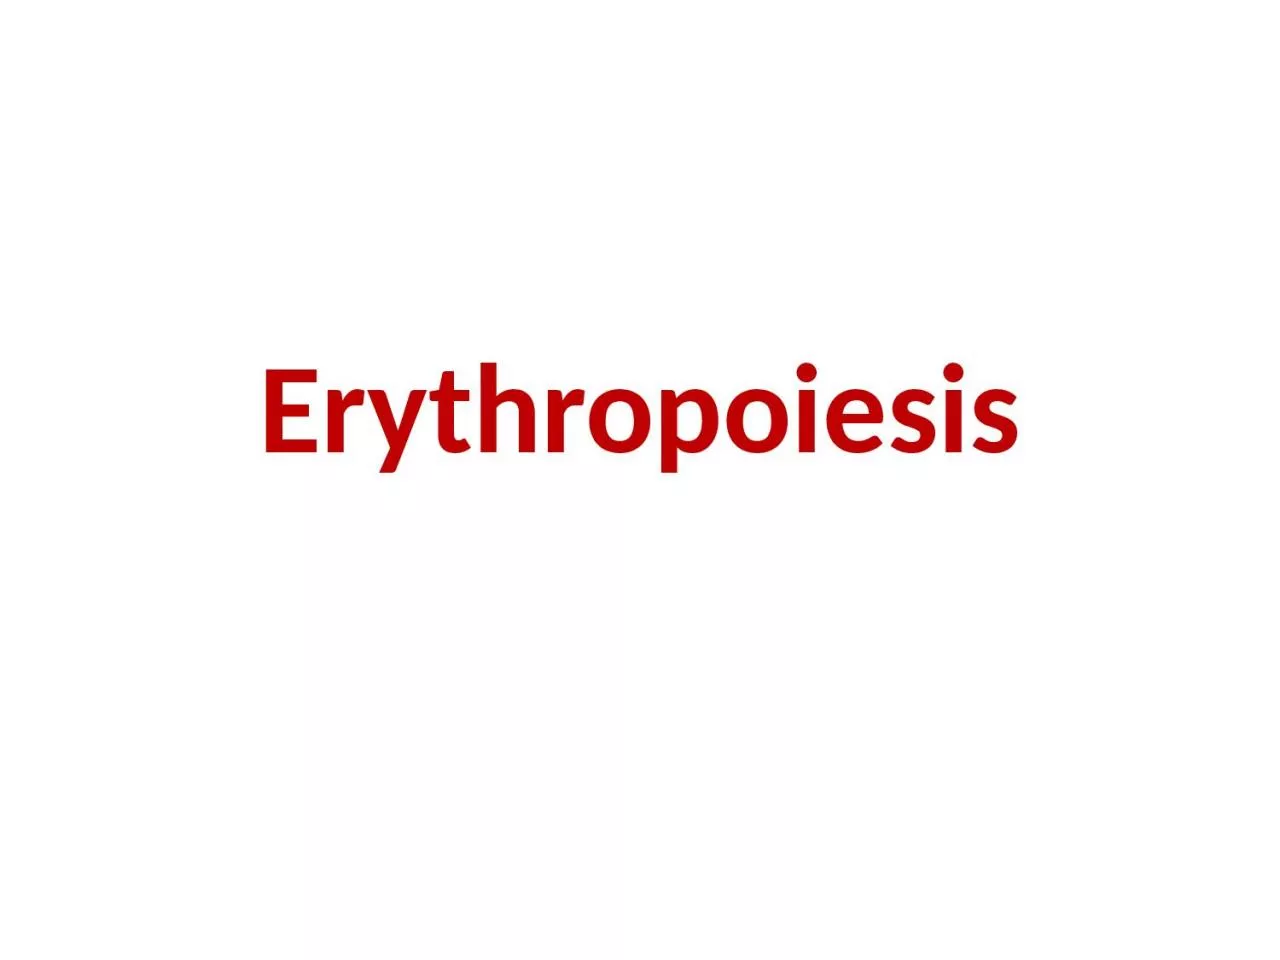 Erythropoiesis All the circulating blood cells derive from